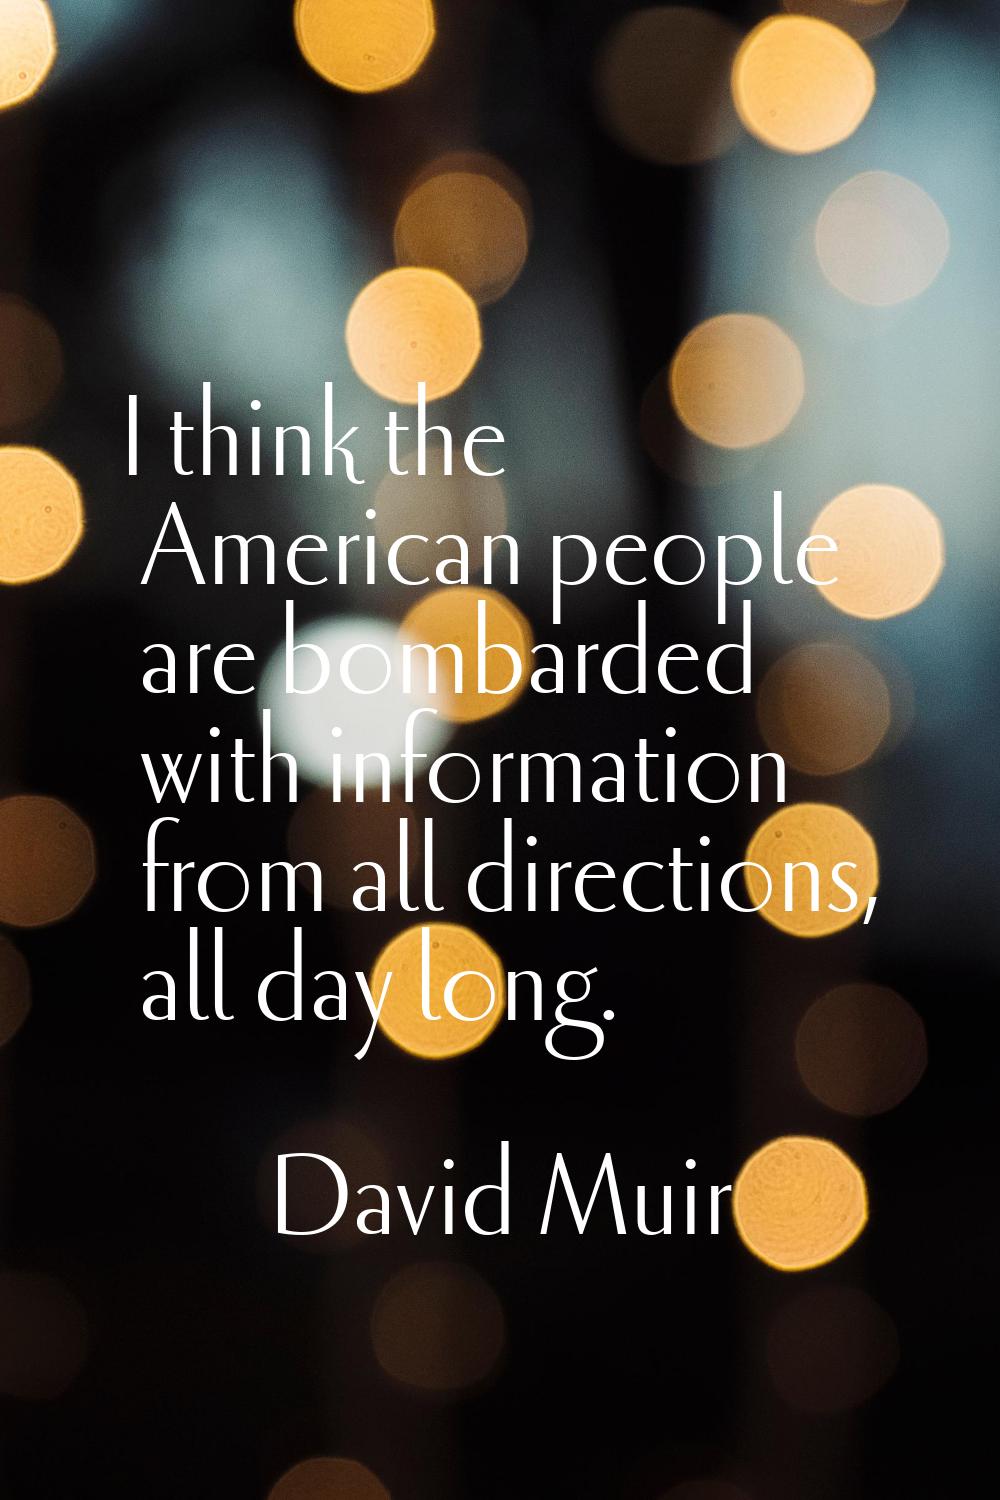 I think the American people are bombarded with information from all directions, all day long.